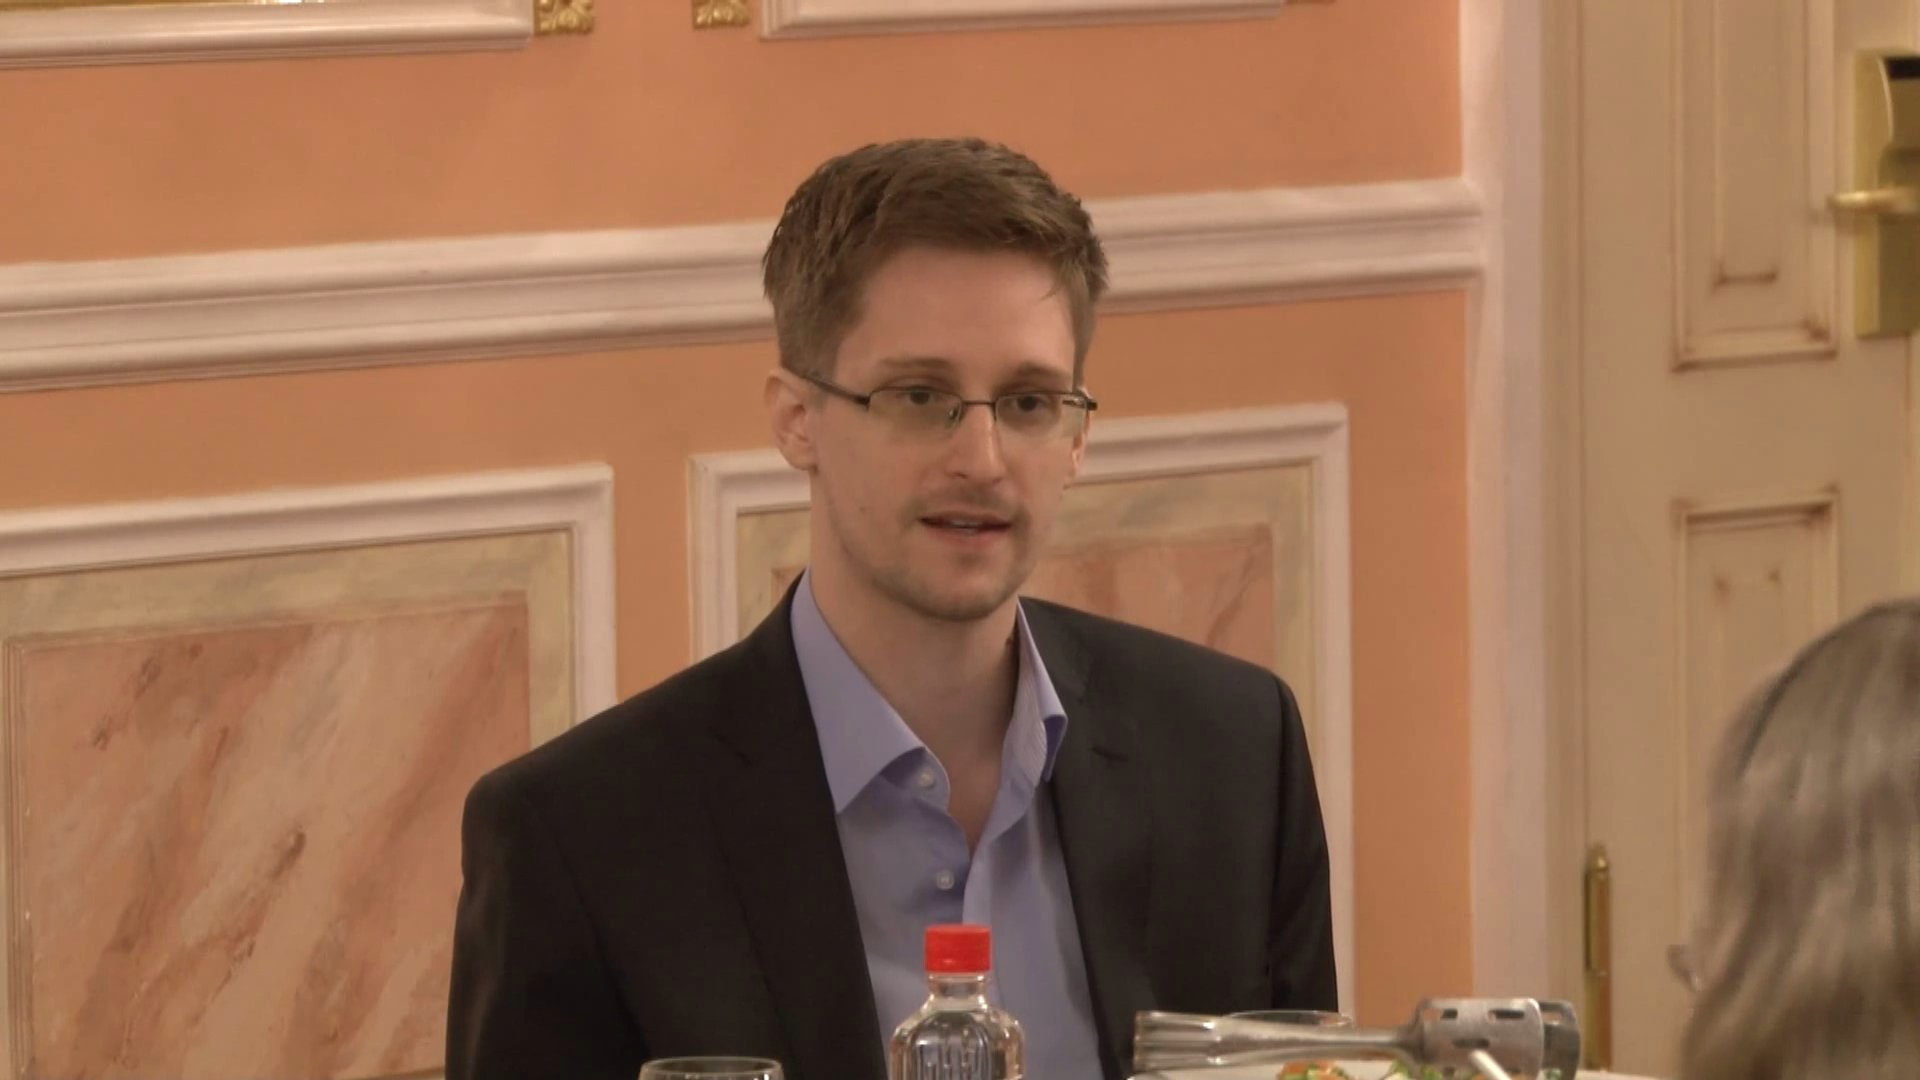 Edward Snowden receives the Sam Adams award for Intelligence Integrity in Moscow. Photo by TheWikiLeaksChannel on YouTube screenshot, via Wikimedia Commons.